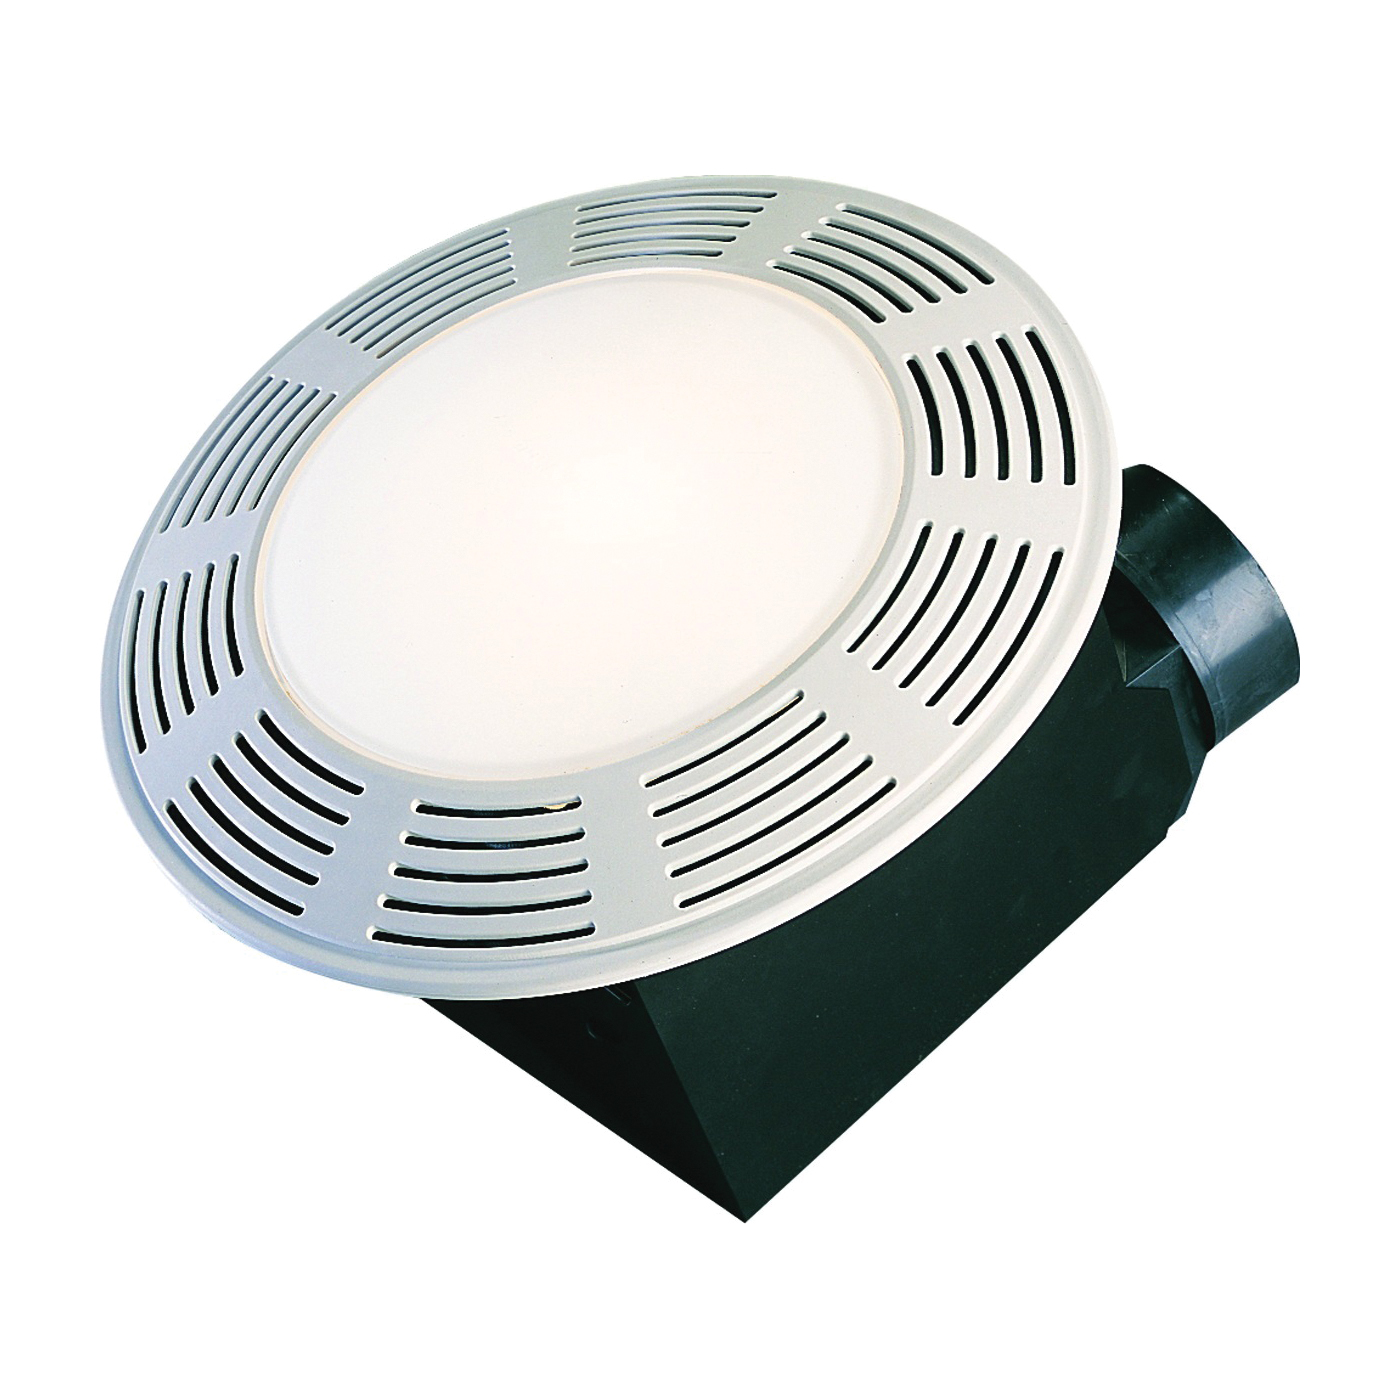 AK863L Exhaust Fan, 0.8 A, 120 V, 100 cfm Air, 3.5 Sones, CFL, Incandescent Lamp, 4 in Duct, White